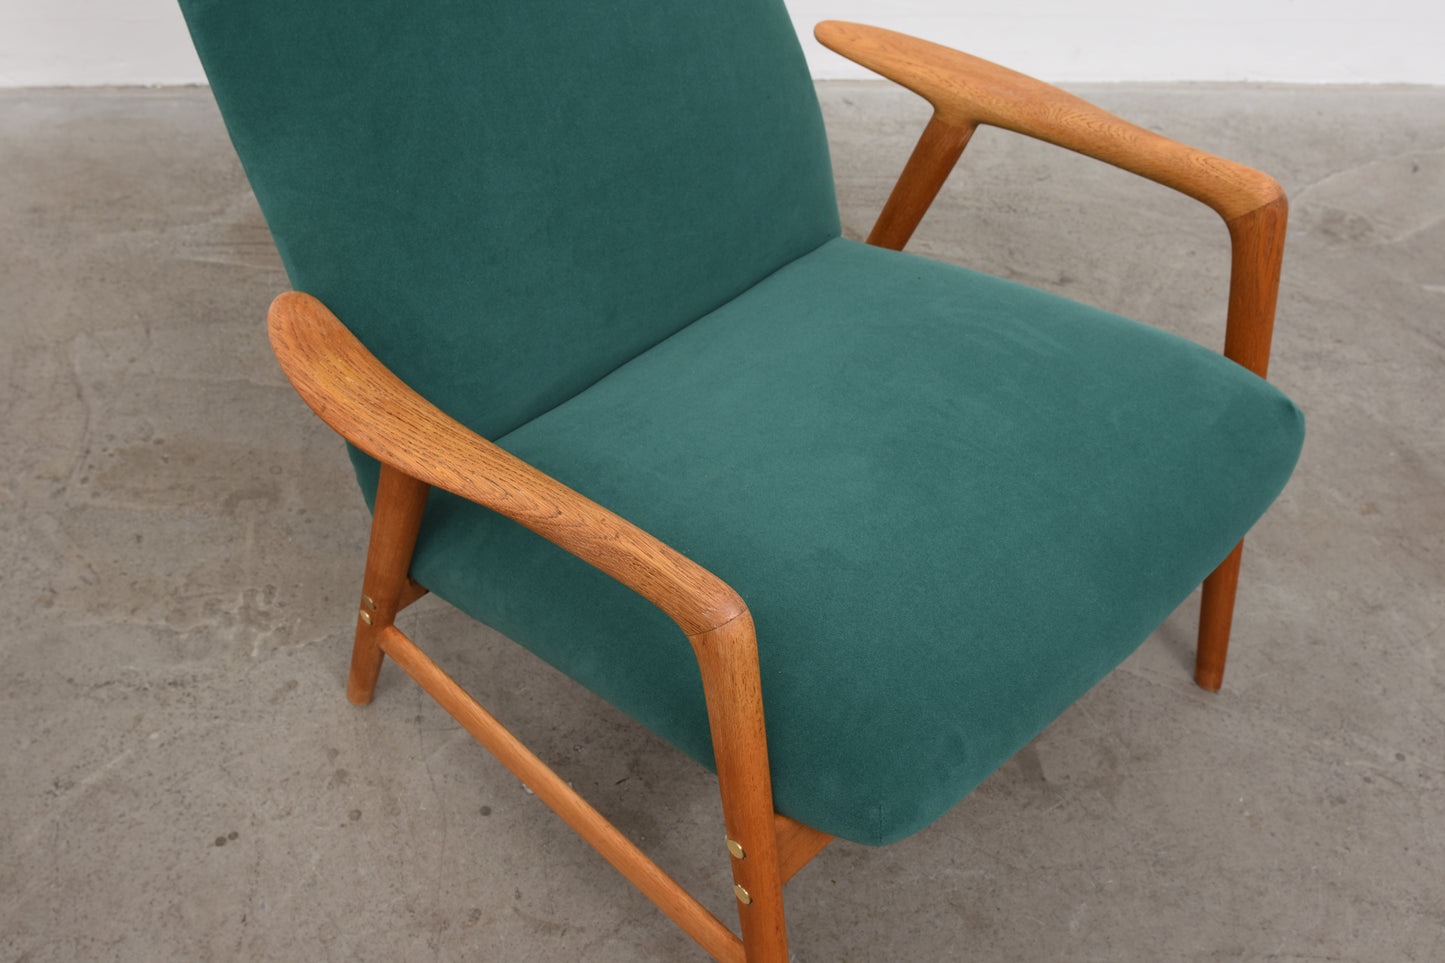 1950s reclining lounger + foot stool by Alf Svensson